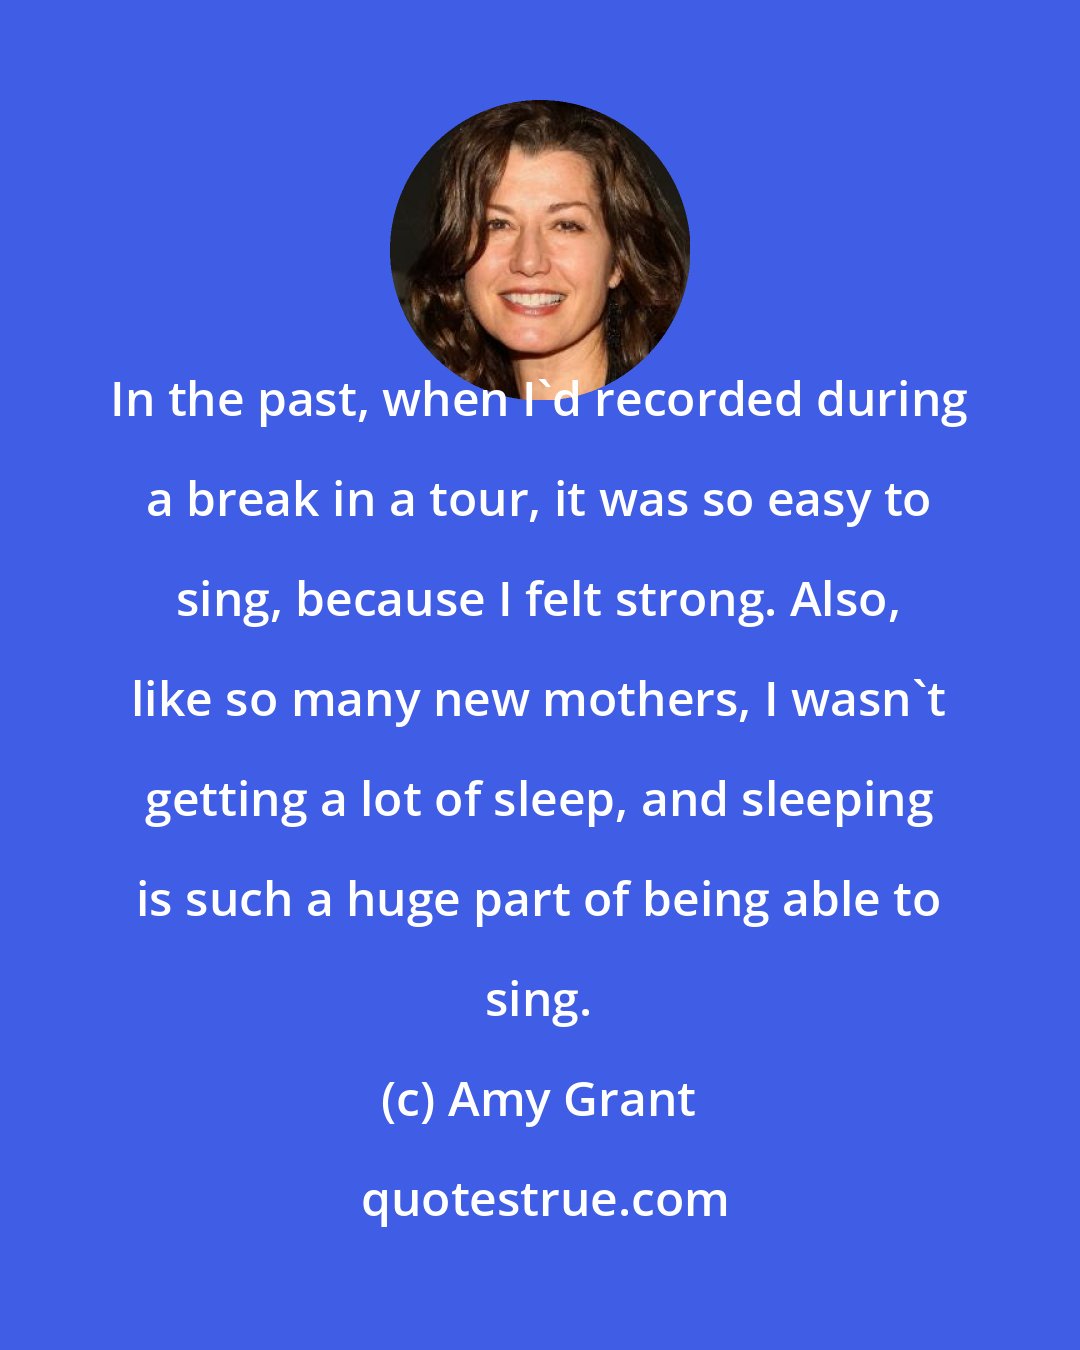 Amy Grant: In the past, when I'd recorded during a break in a tour, it was so easy to sing, because I felt strong. Also, like so many new mothers, I wasn't getting a lot of sleep, and sleeping is such a huge part of being able to sing.